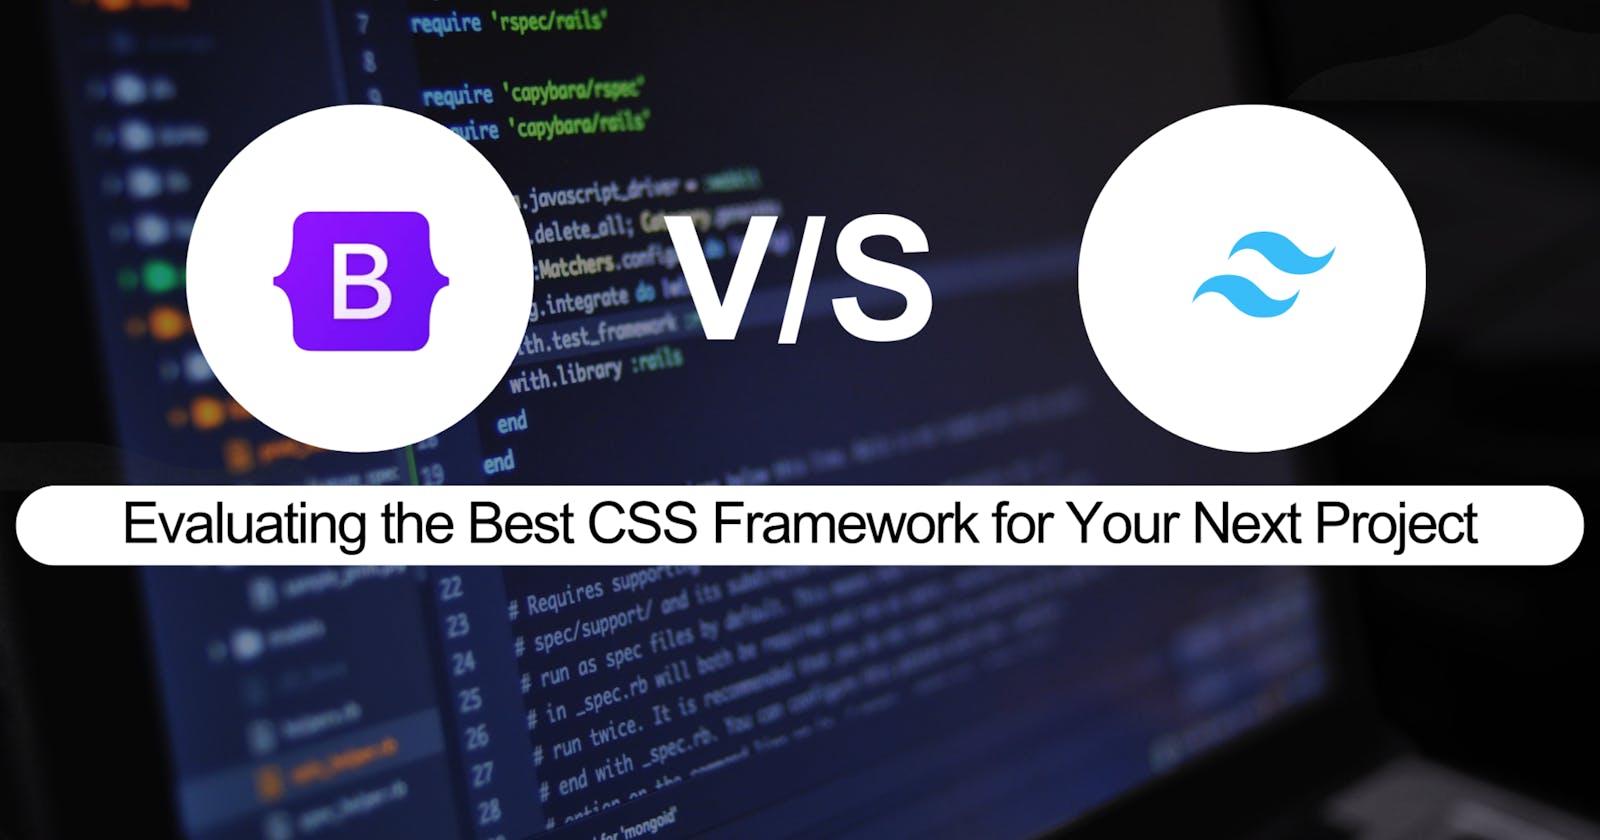 Bootstrap vs Tailwind CSS: Evaluating the Best CSS Framework for Your Next Project